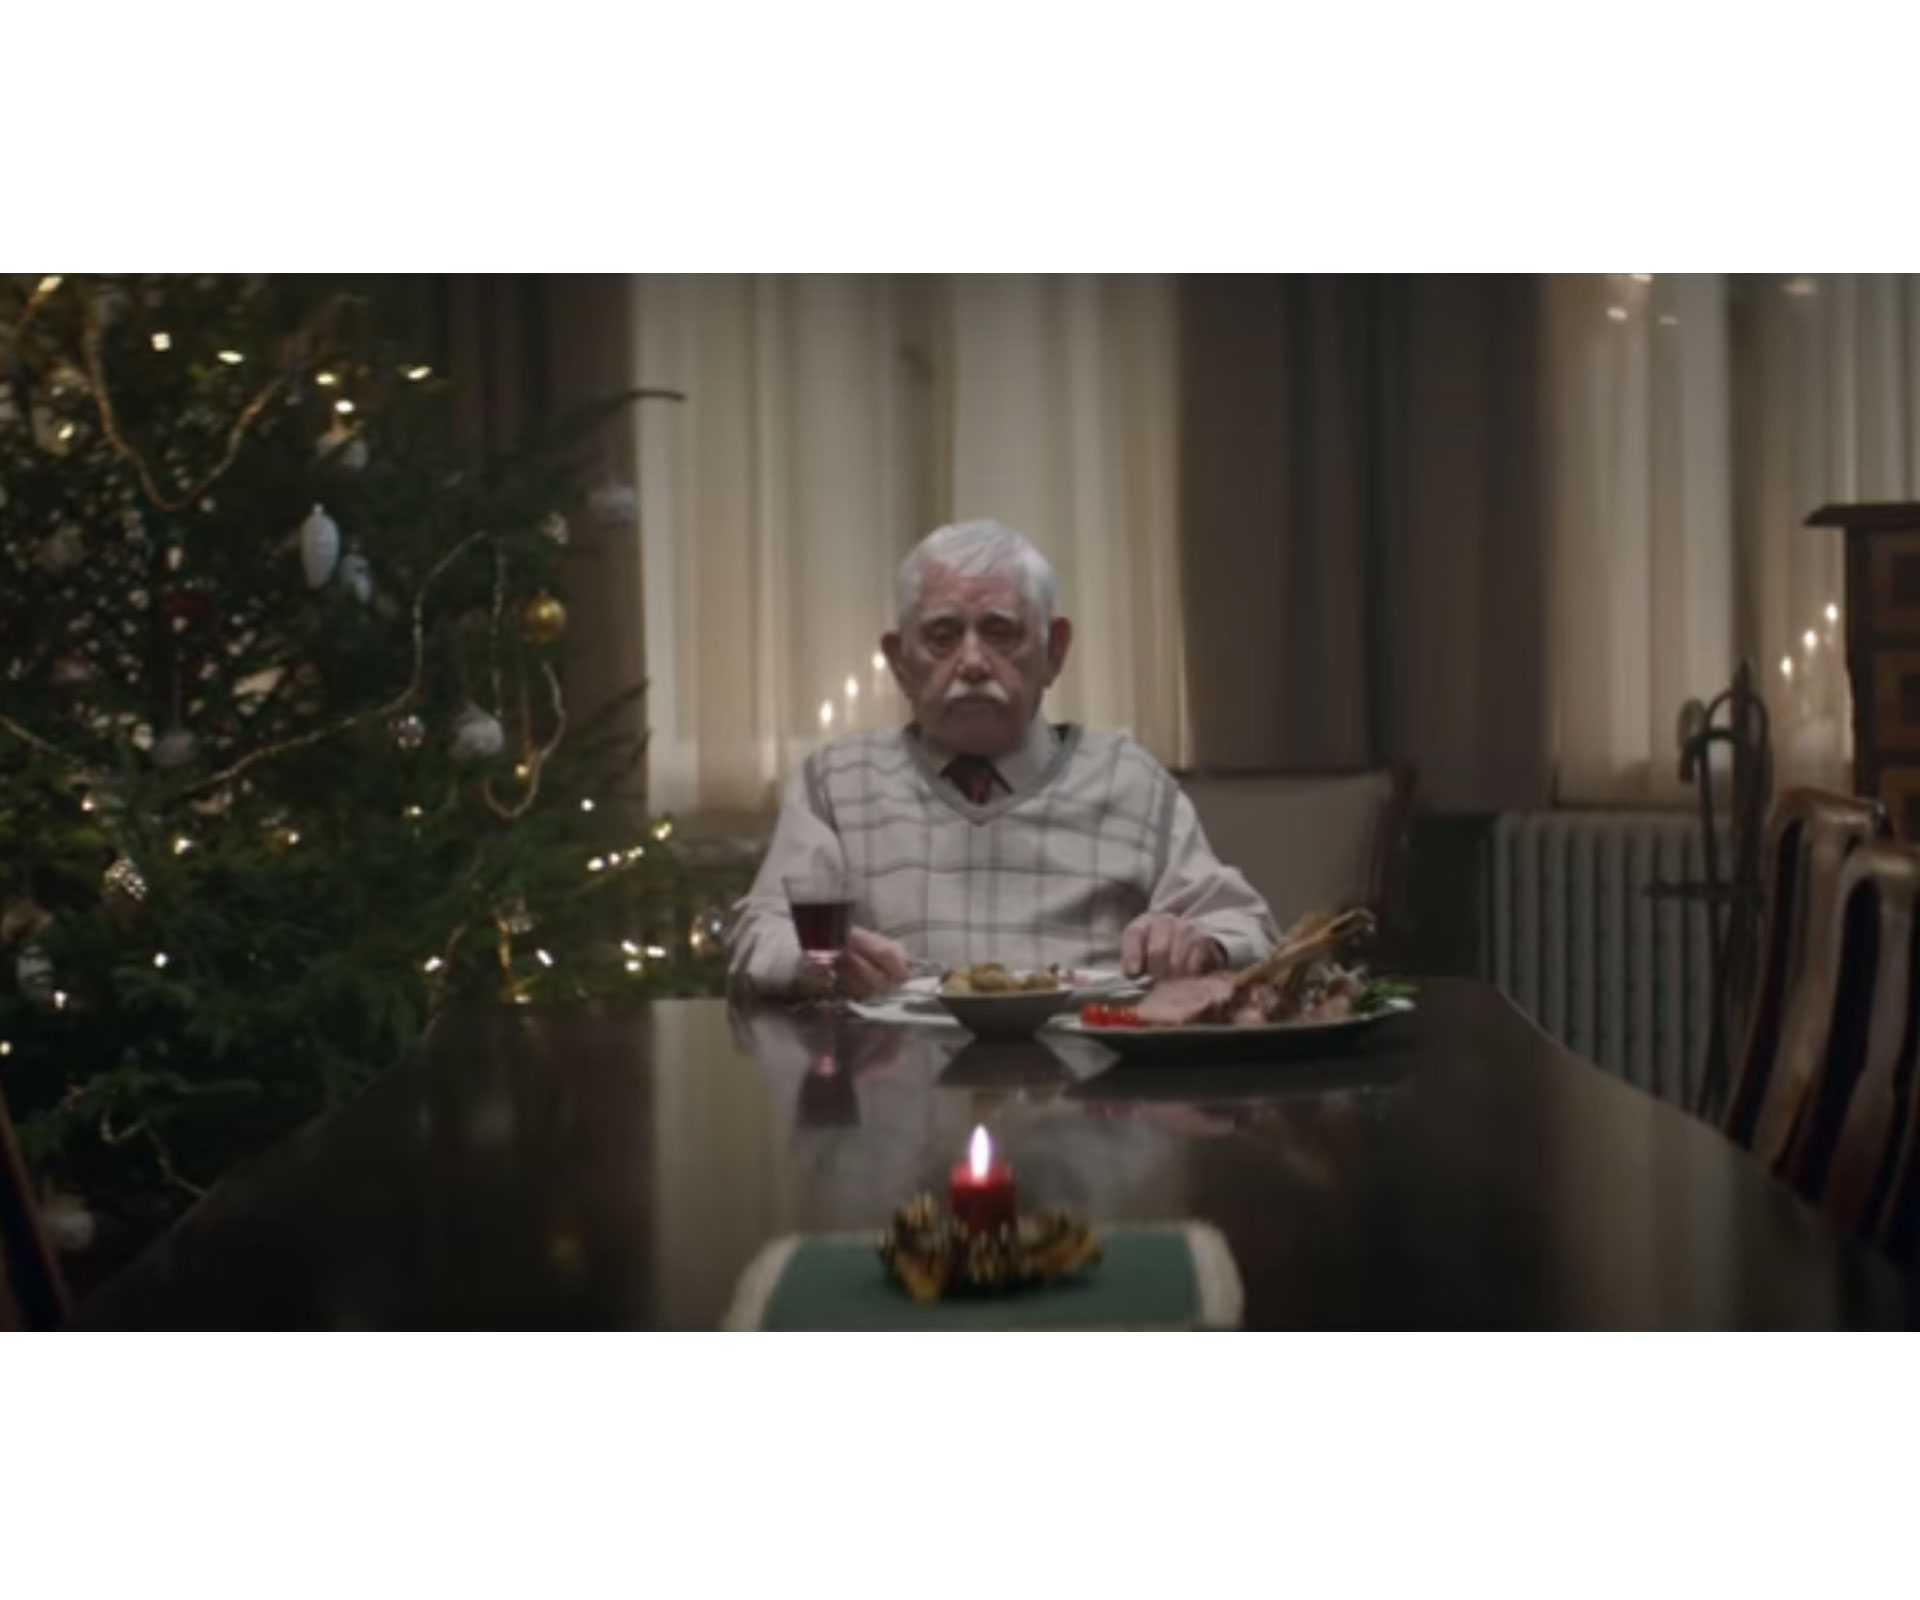 Extremely sad Christmas commercial goes viral